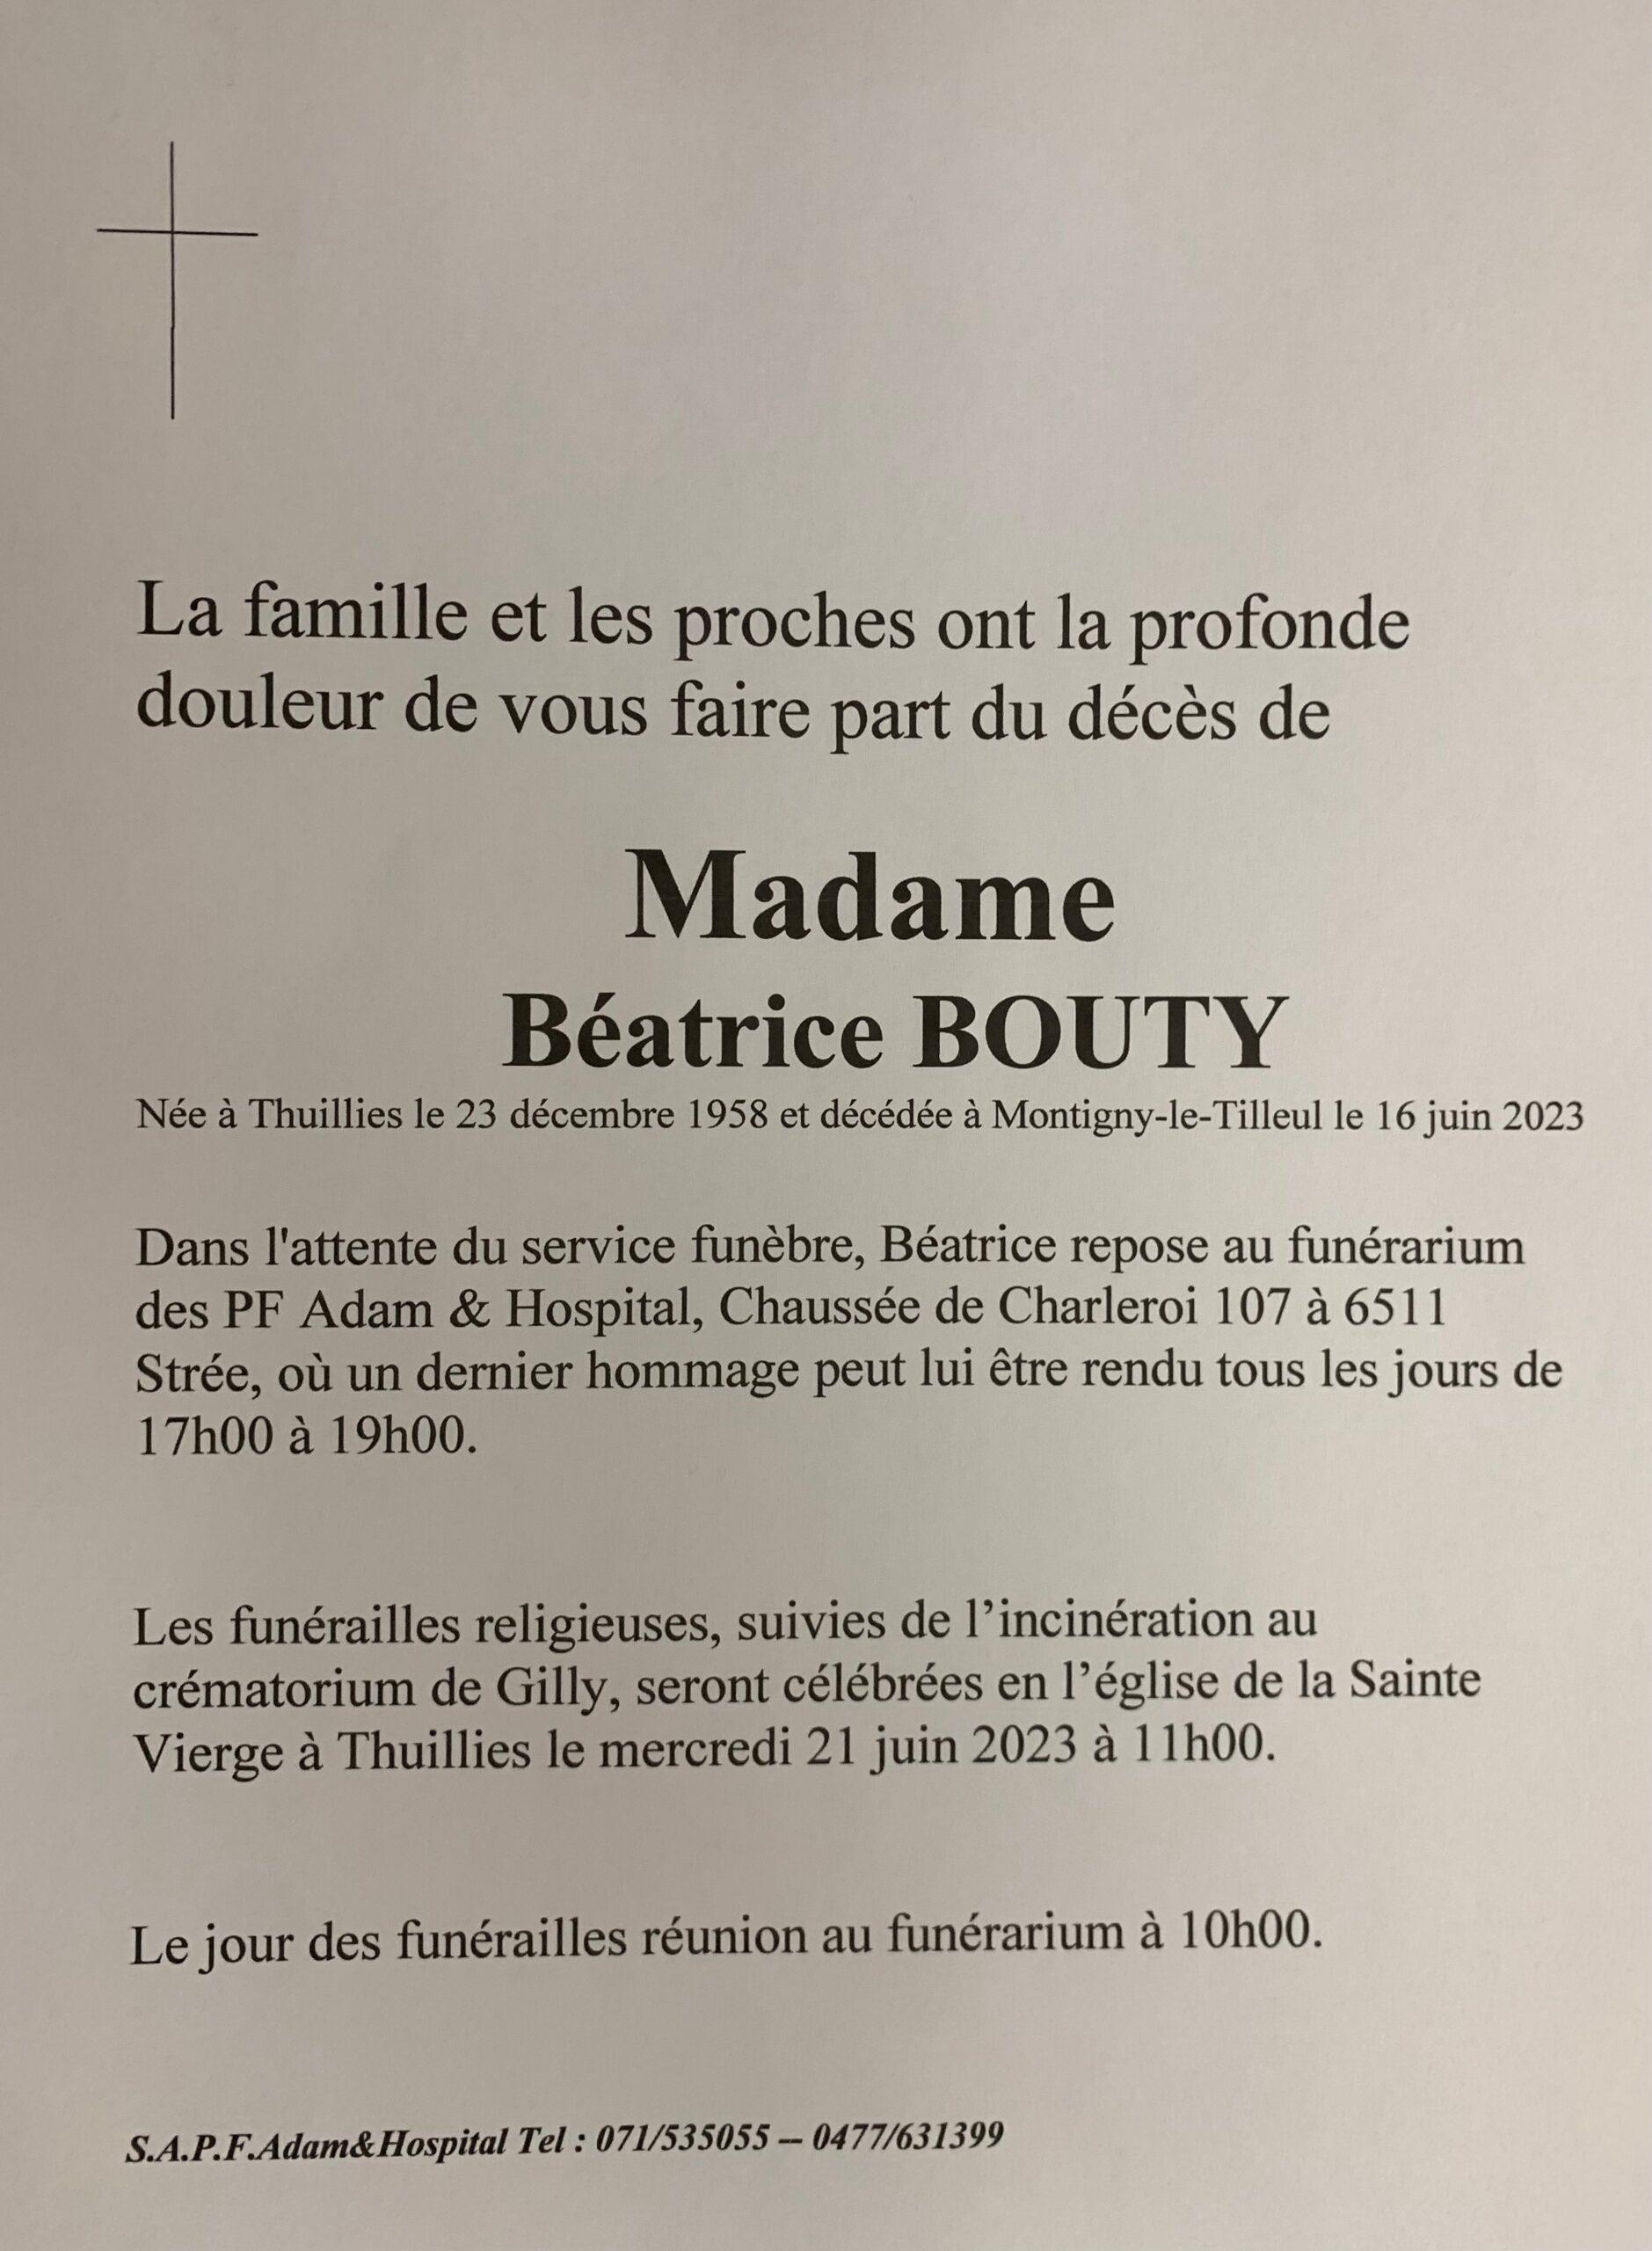 Madame Beatrice BOUTY scaled | Funérailles Adam Hospital